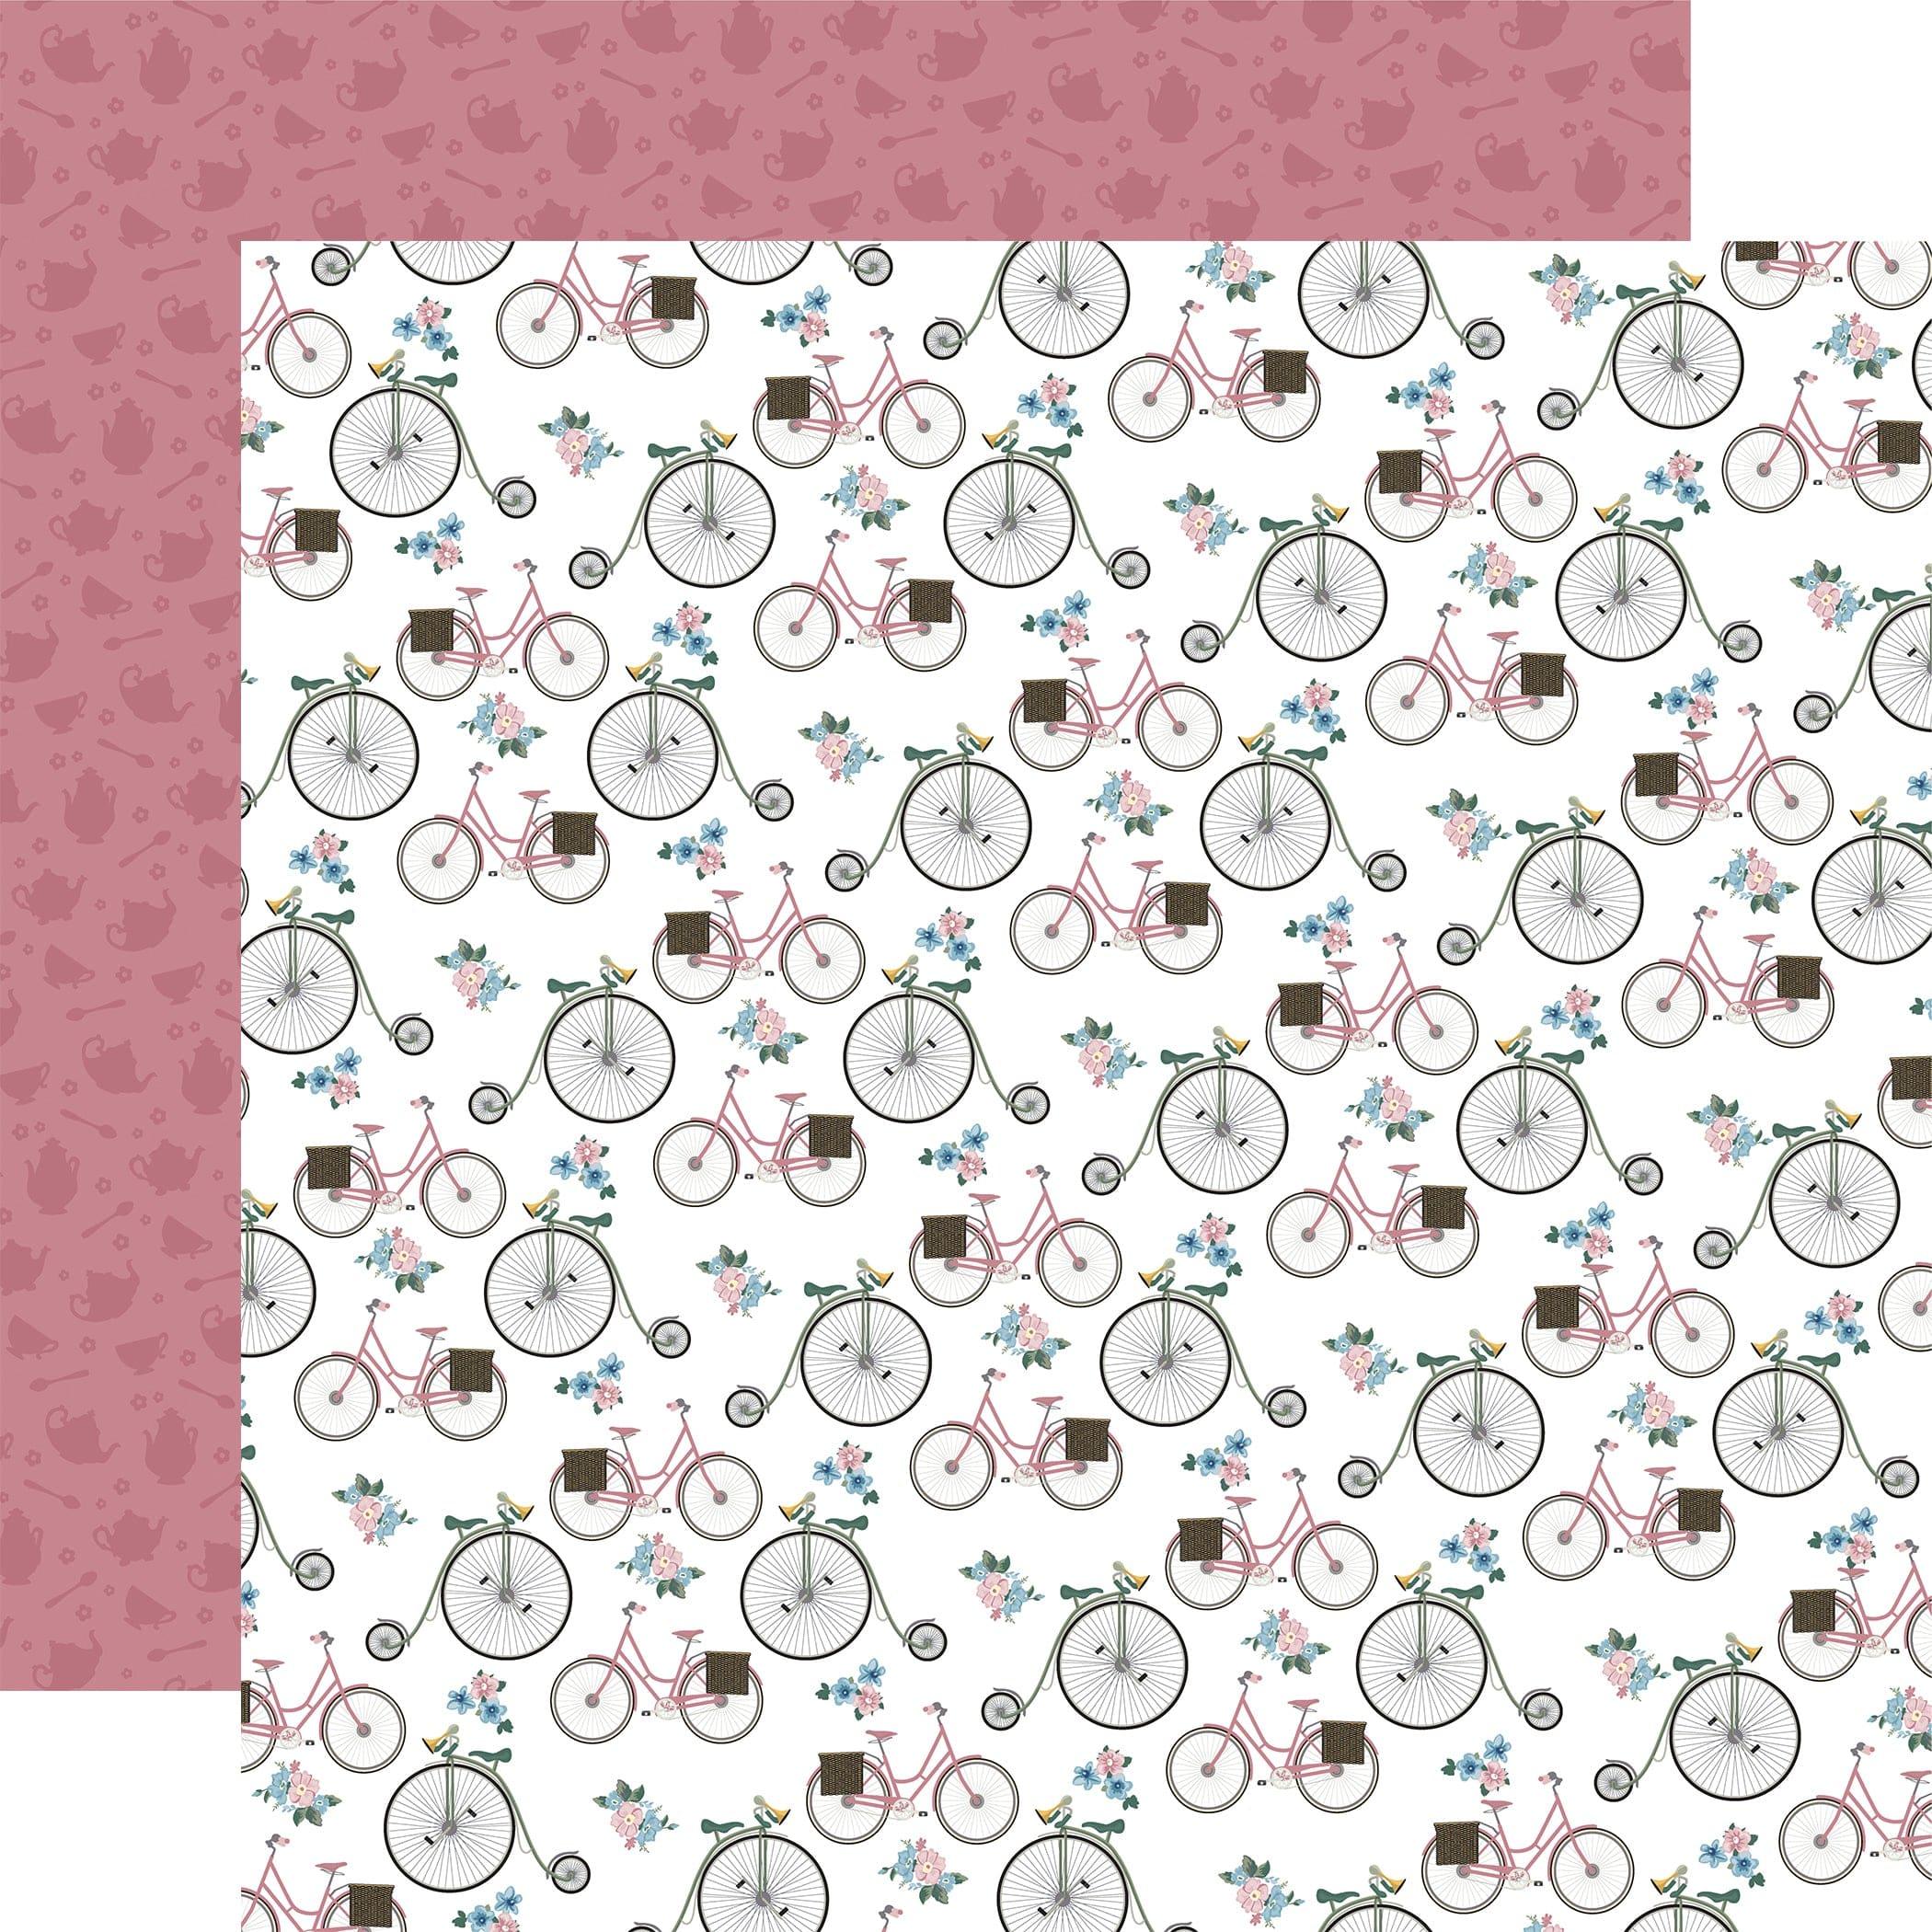 My Favorite Things Collection Enjoy The Ride 12 x 12 Double-Sided Scrapbook Paper by Carta Bella